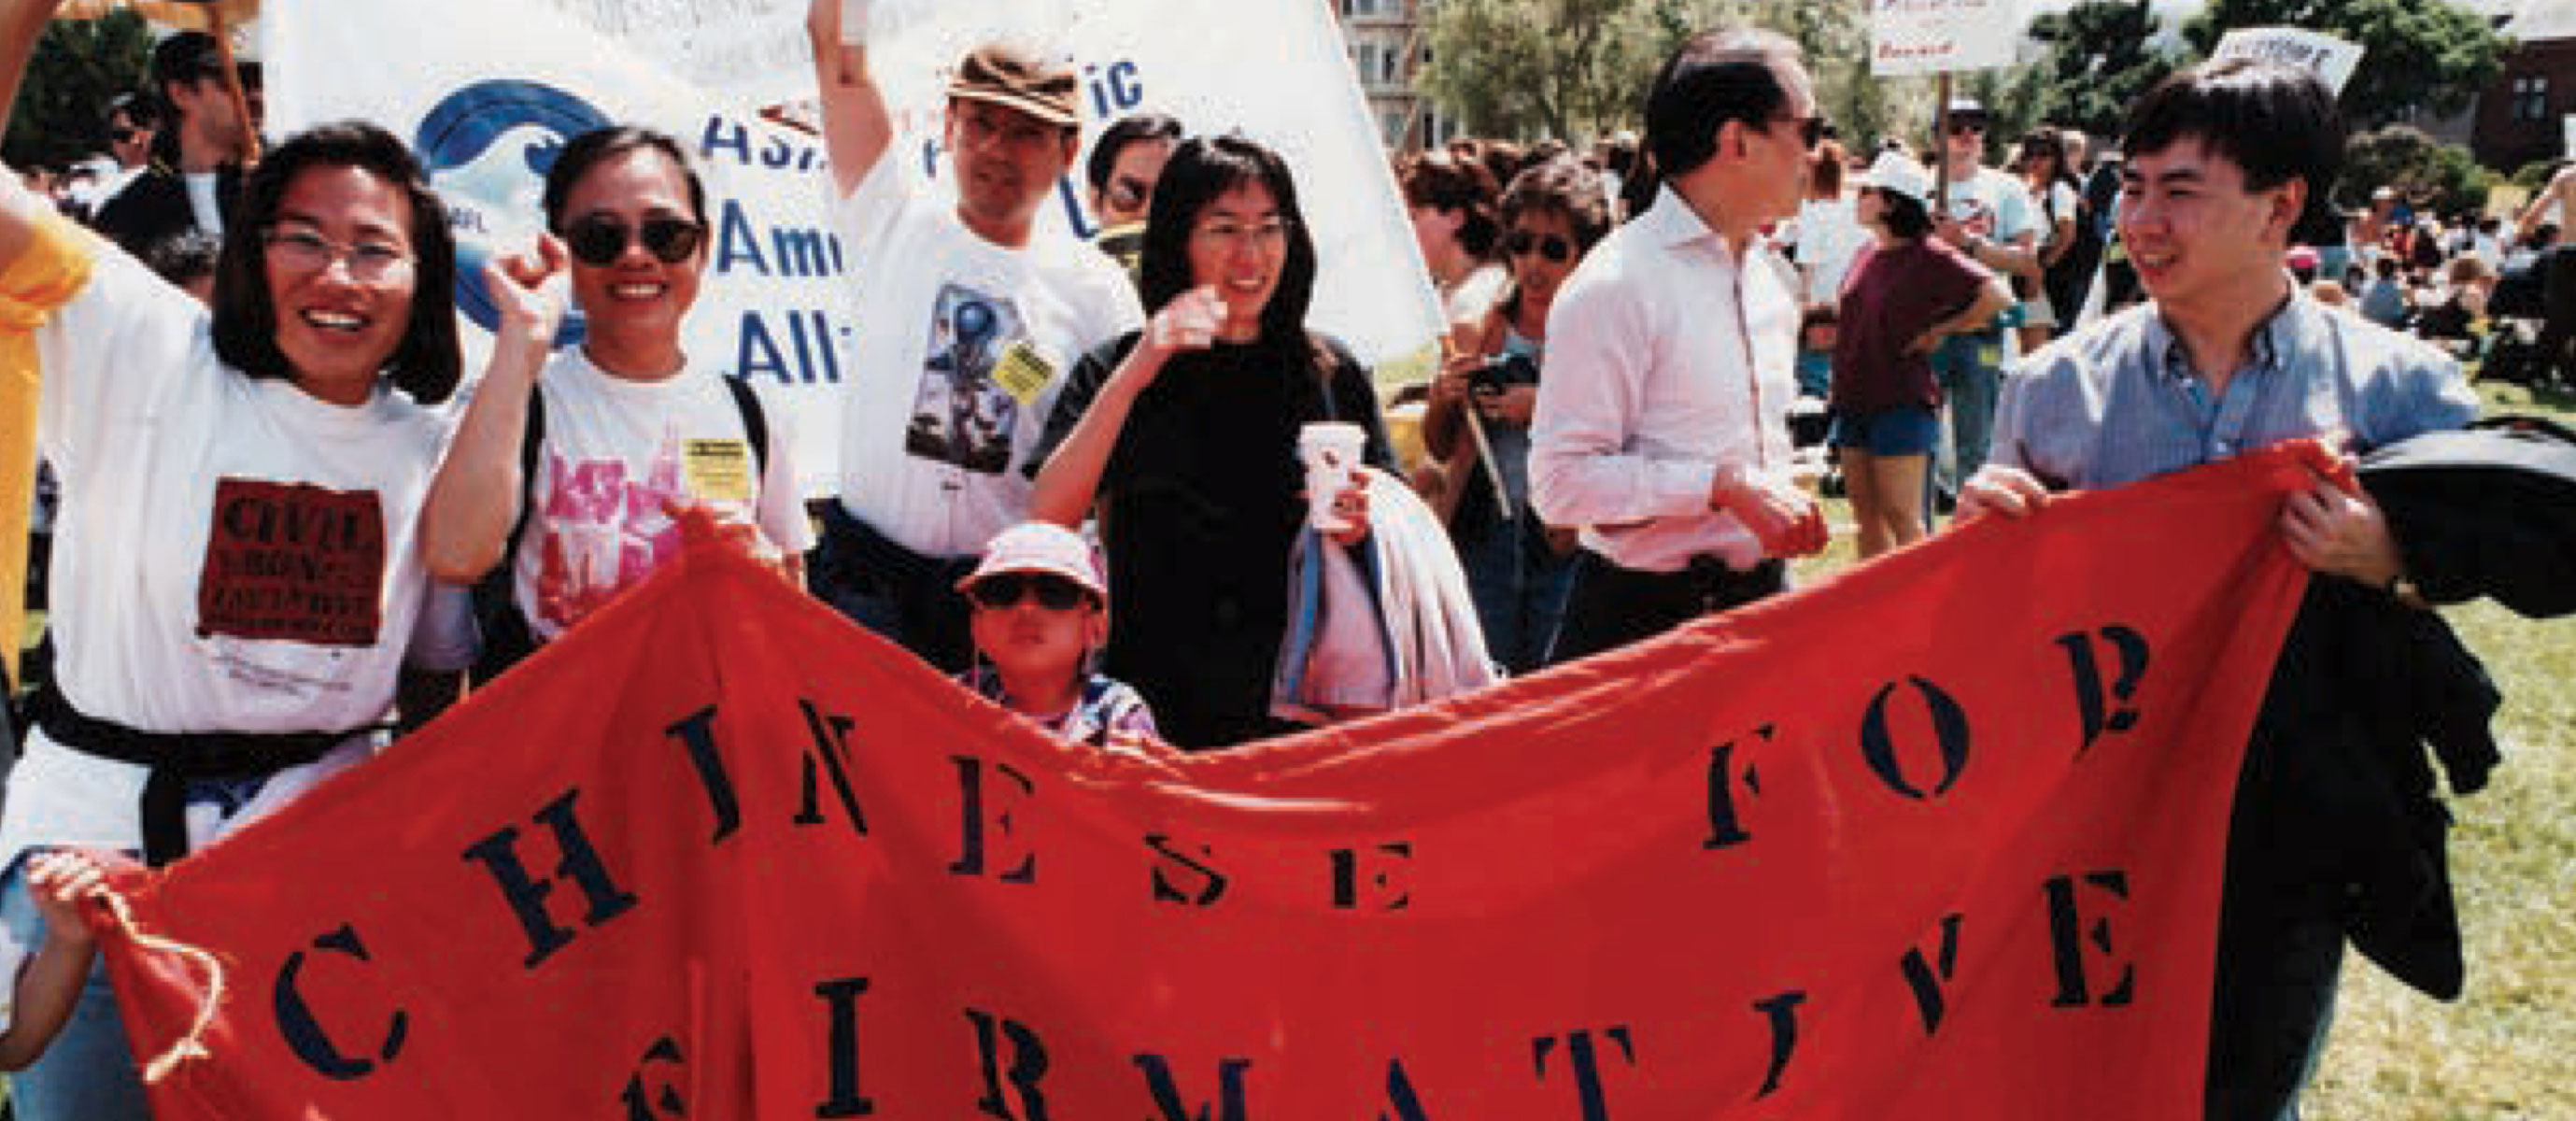 people holding a banner